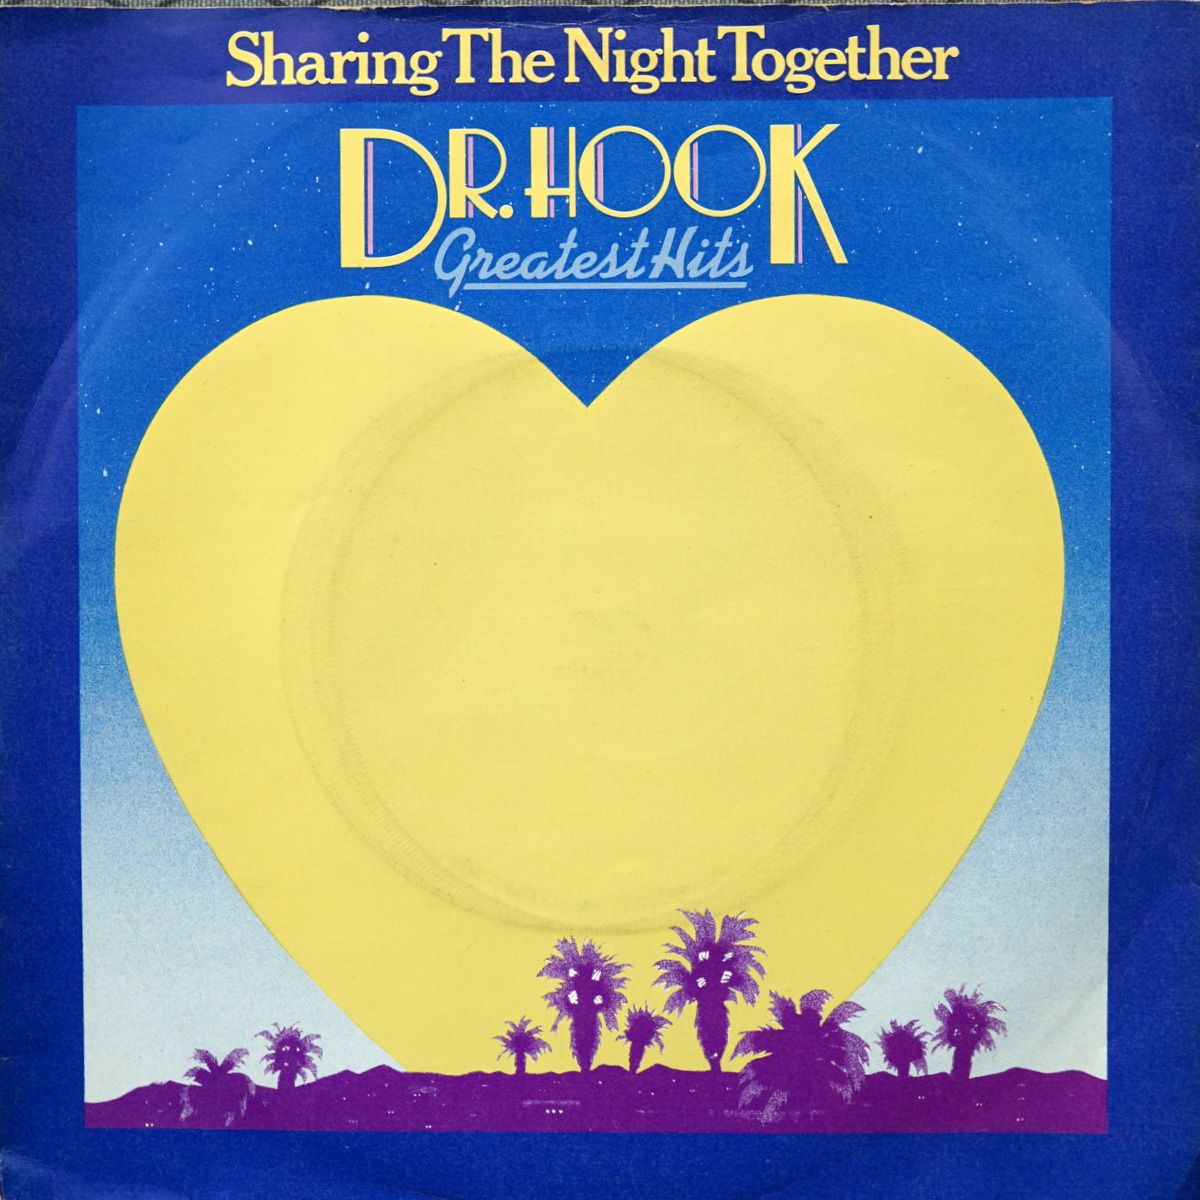 S PP A1 - CL 16171 - Sharing the Night Together - 1981 - UK-001